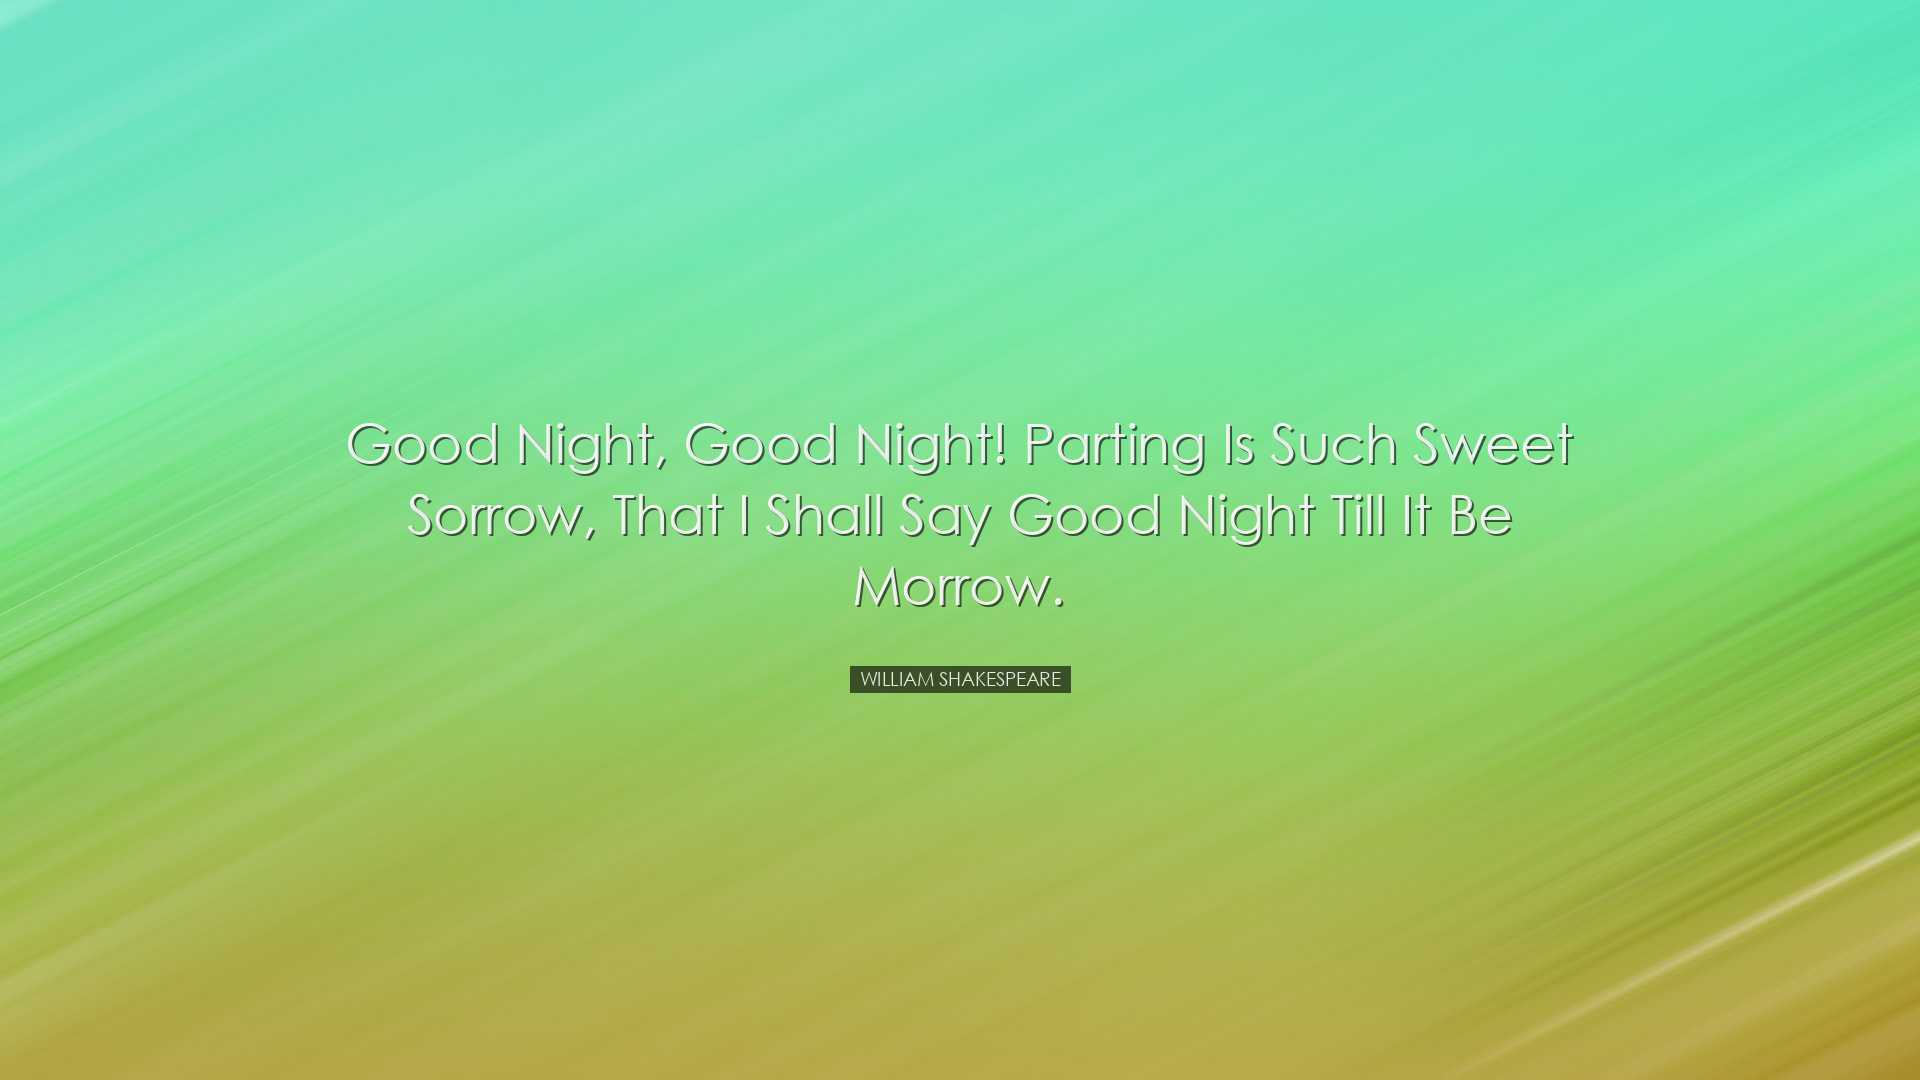 Good night, good night! Parting is such sweet sorrow, that I shall